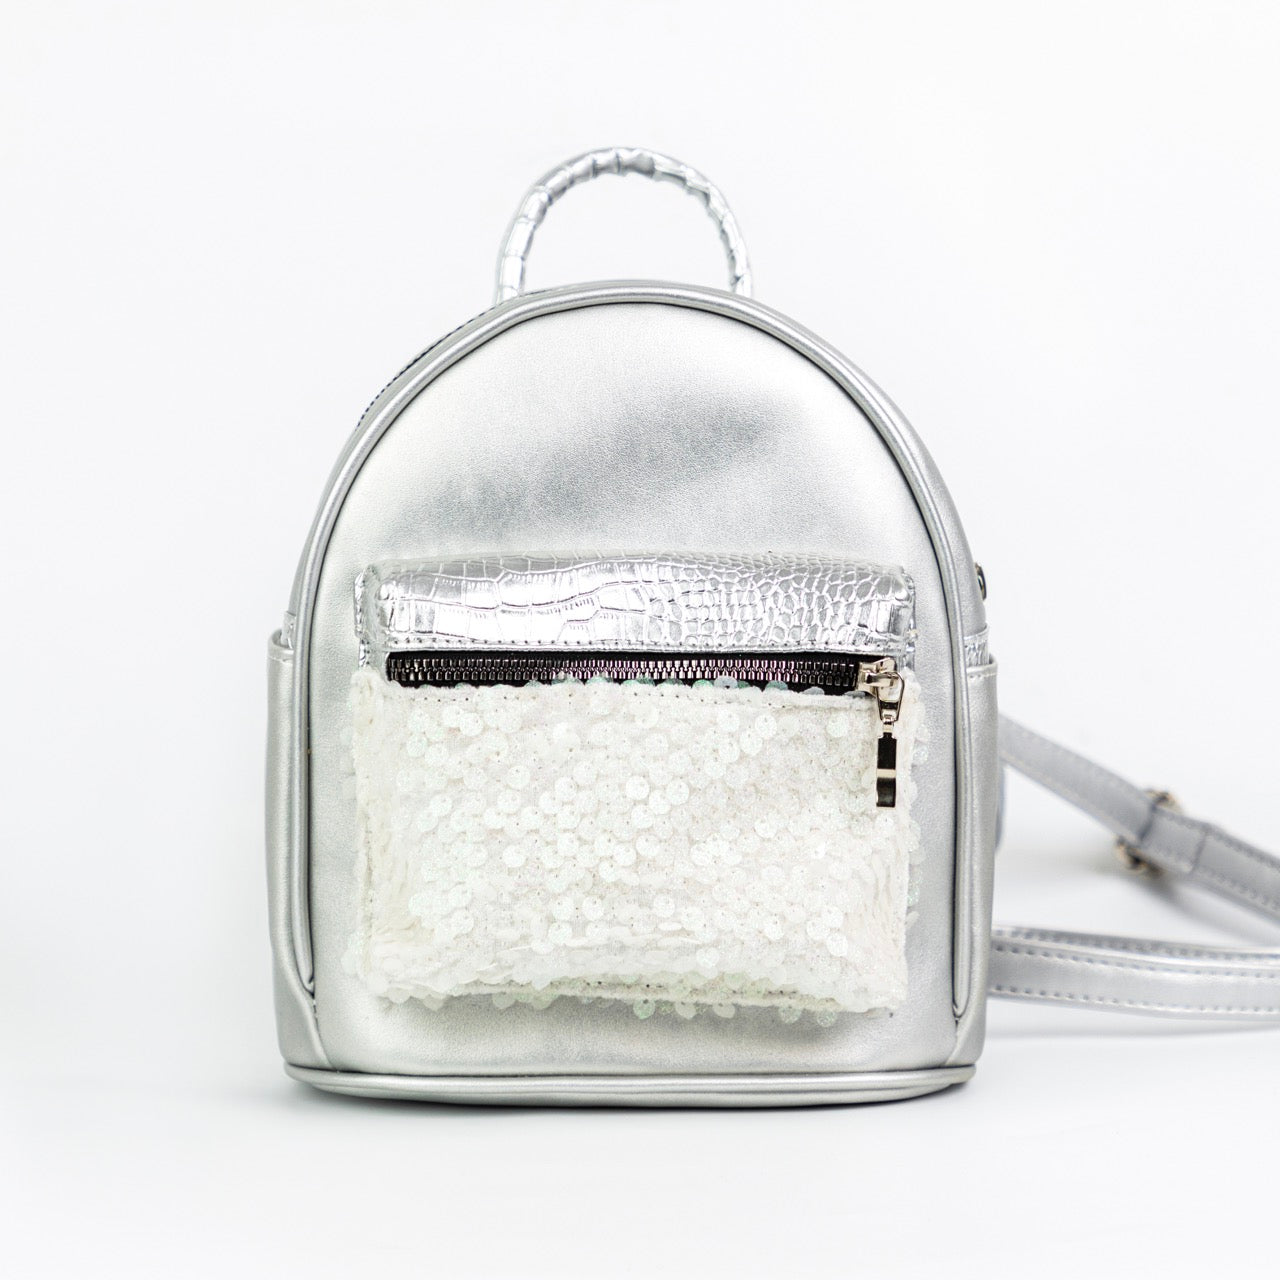 ngaos_tabby_milkyway_vegan_lether_tweed_small_backpack_silver